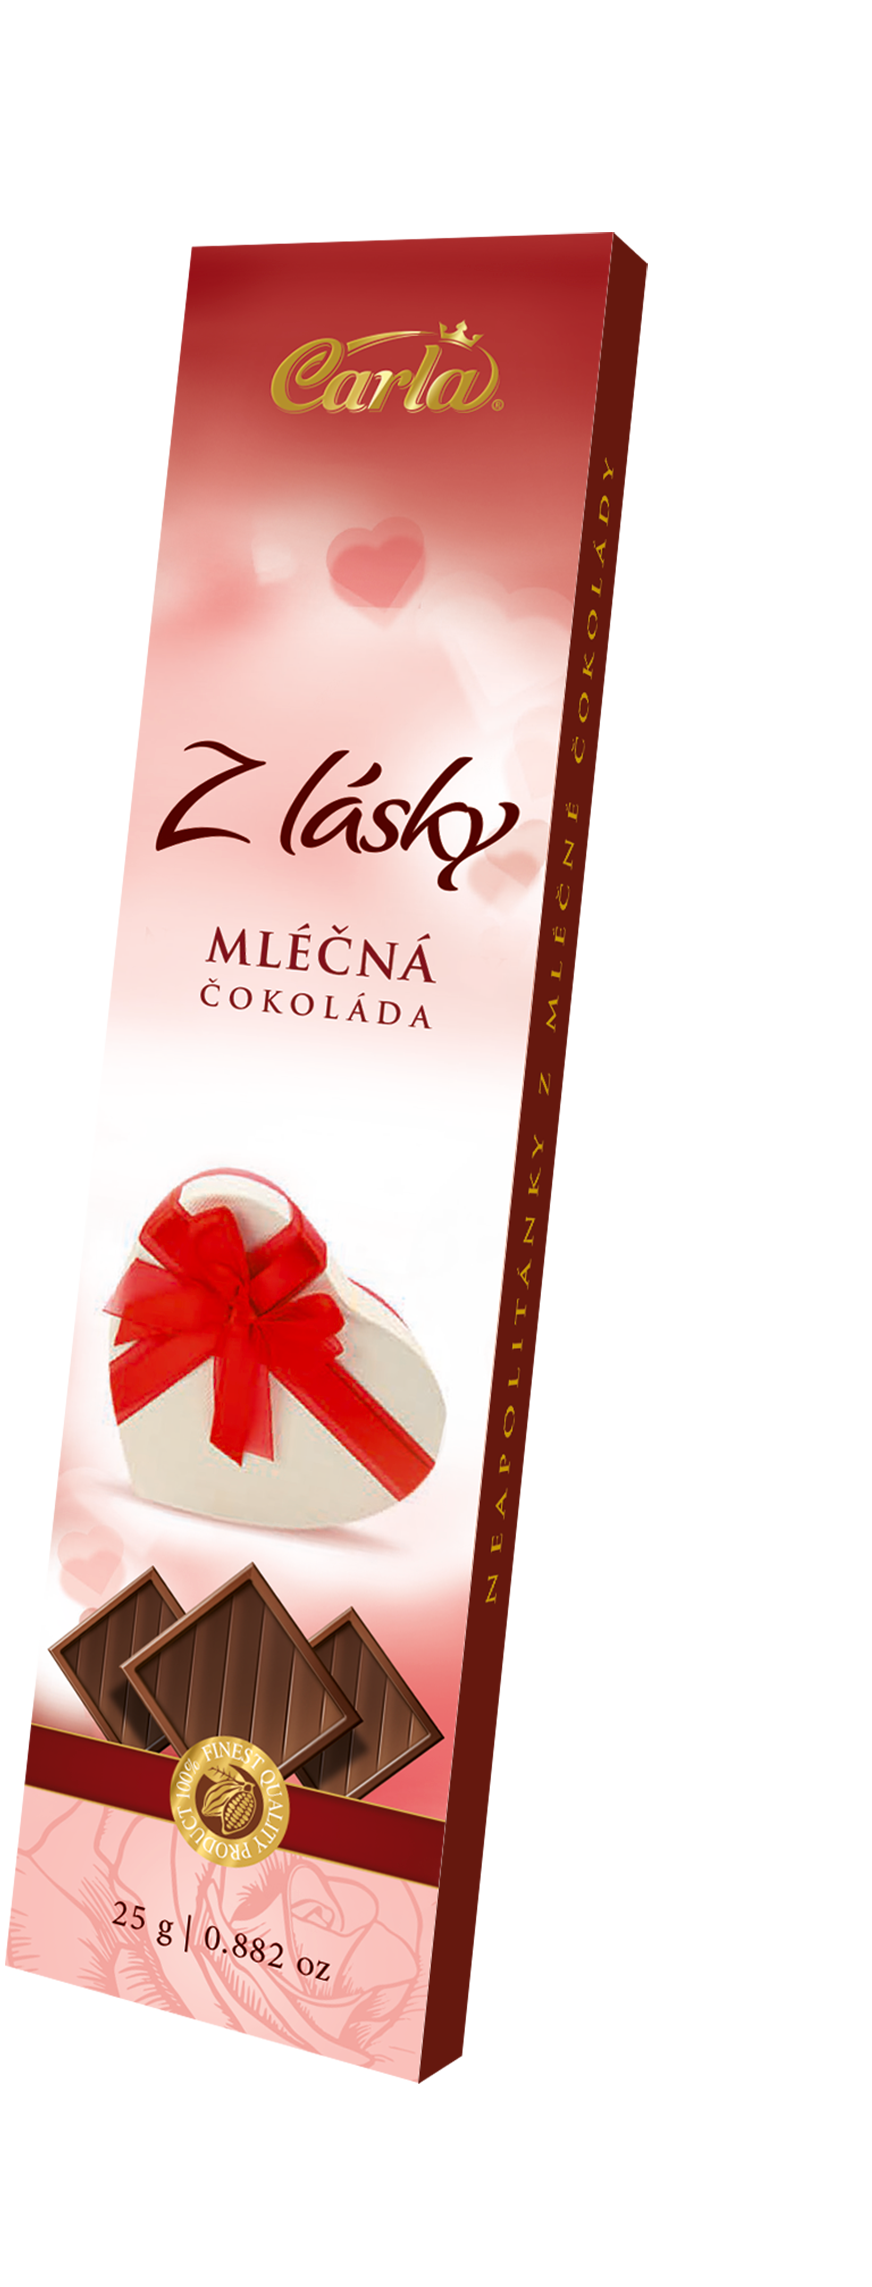 With Love - neapolitans of milk chocolate 25g - Carla